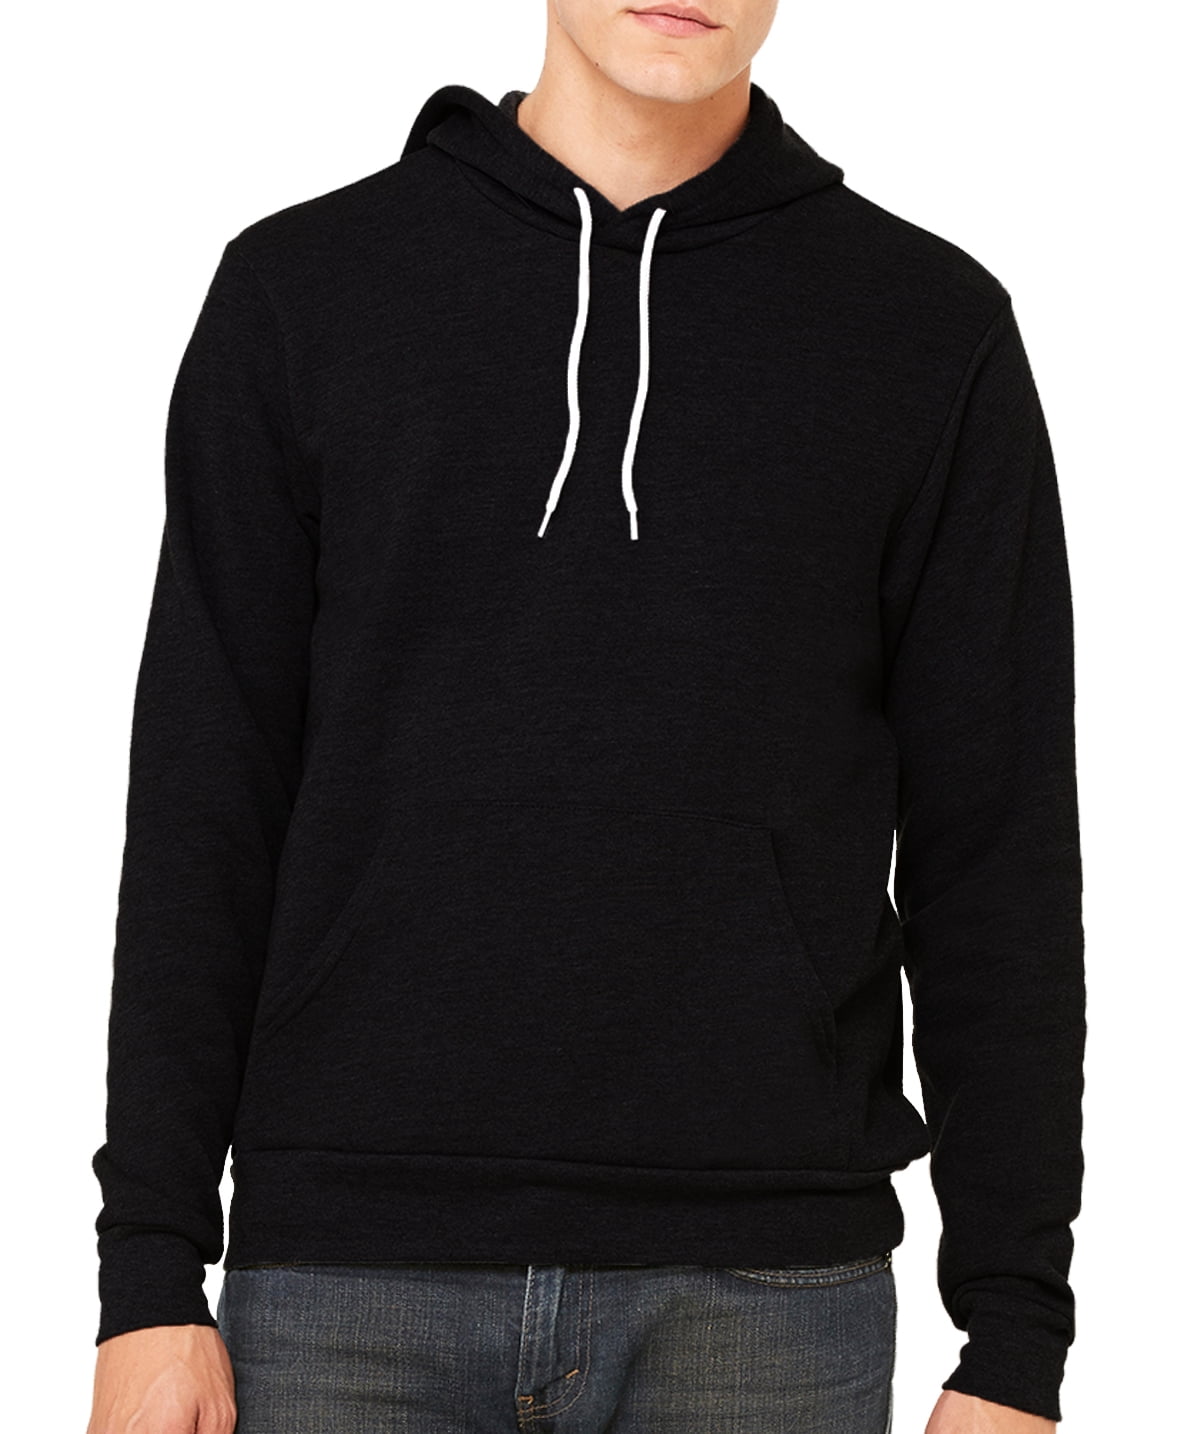 Unisex Hooded Sweater, Cotton/Poly Plain Hoodie - Black MH200HOOD 2XL ...